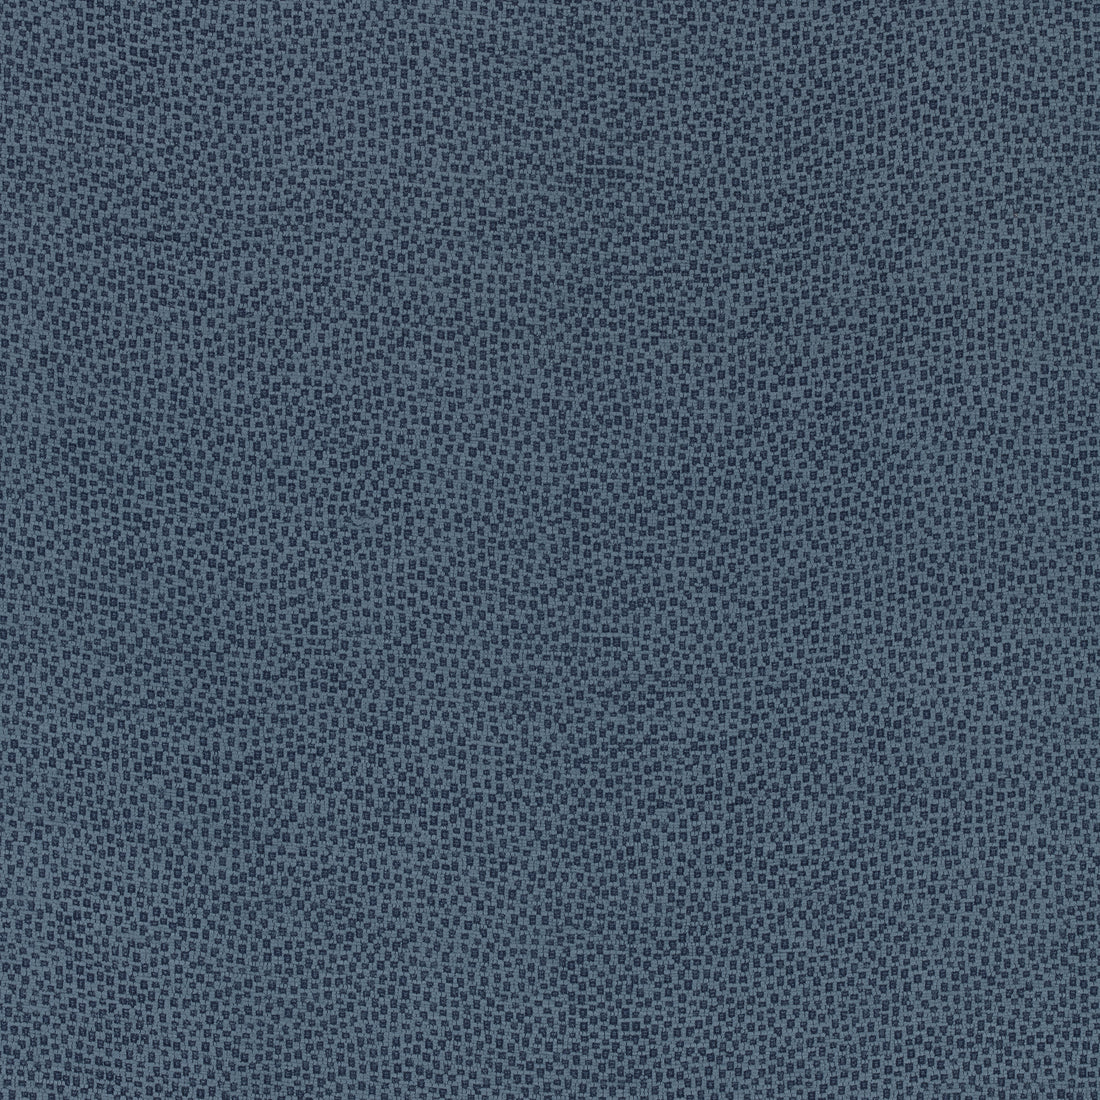 Nala fabric in navy color - pattern number W74080 - by Thibaut in the Cadence collection